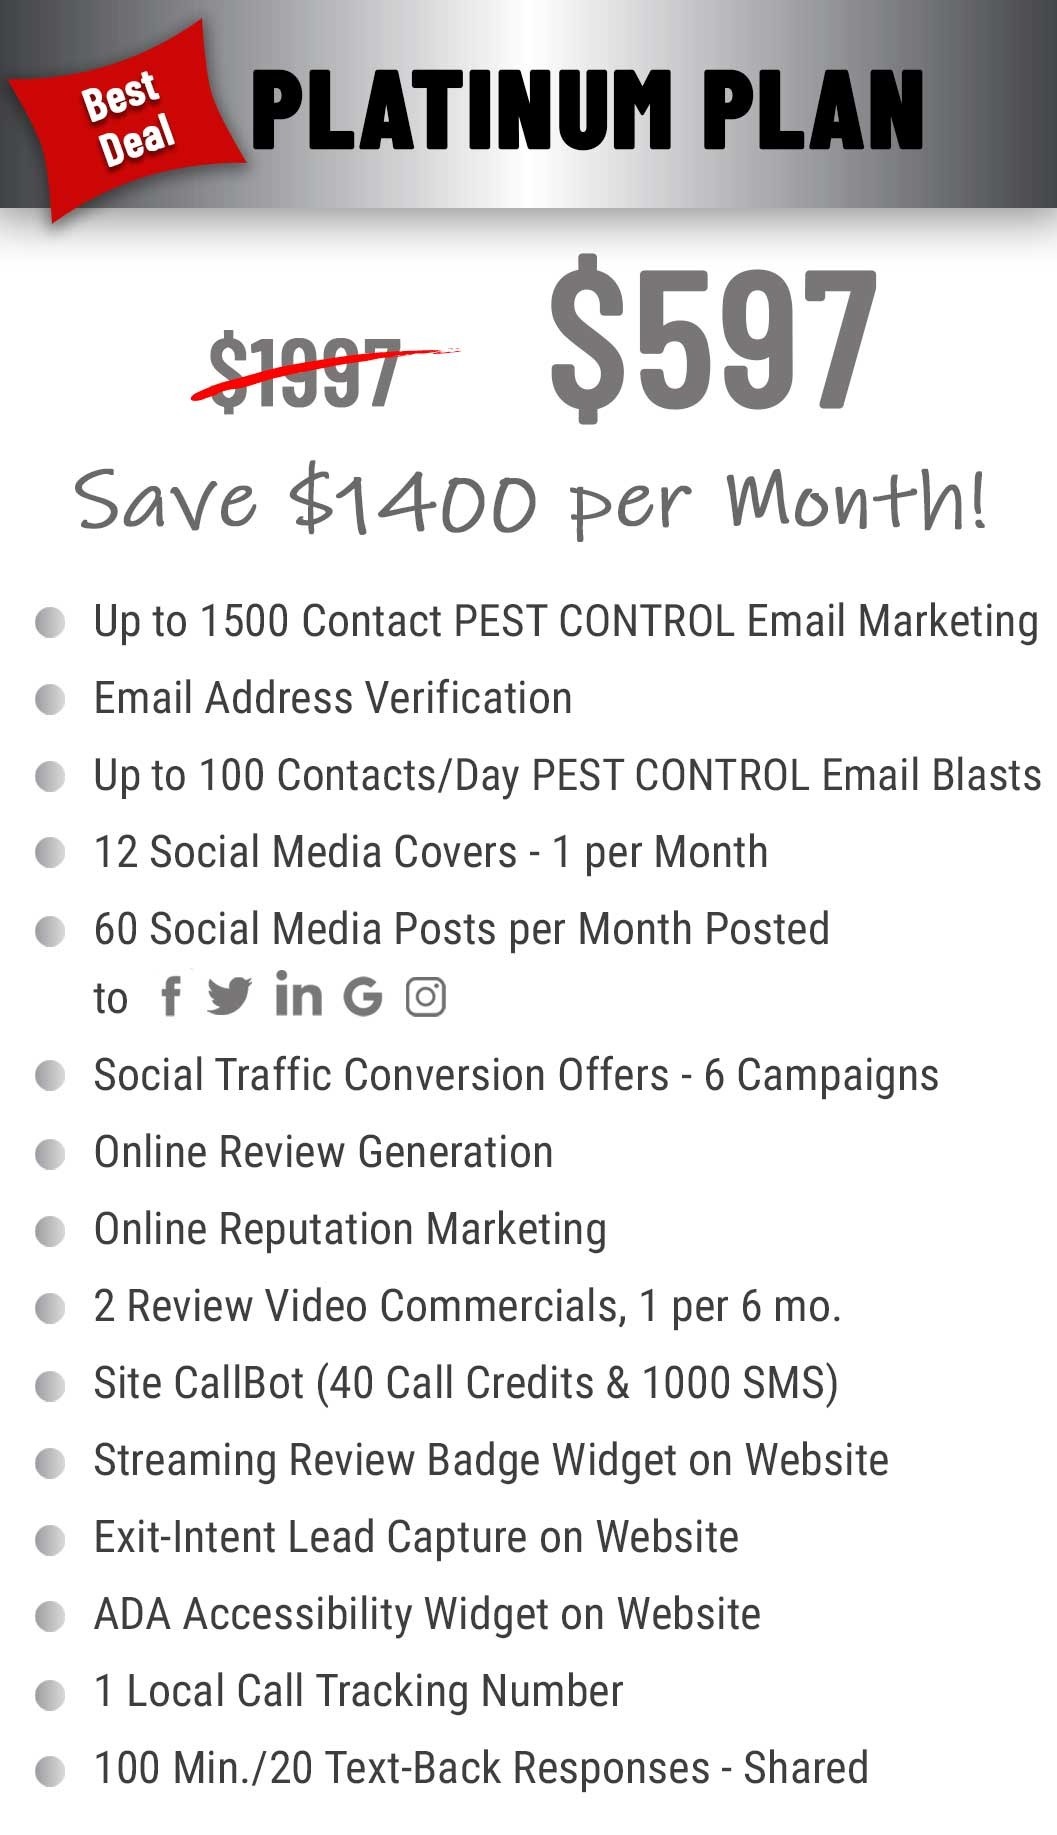 platinum plan $597 per month pricing and features for pest control companies.